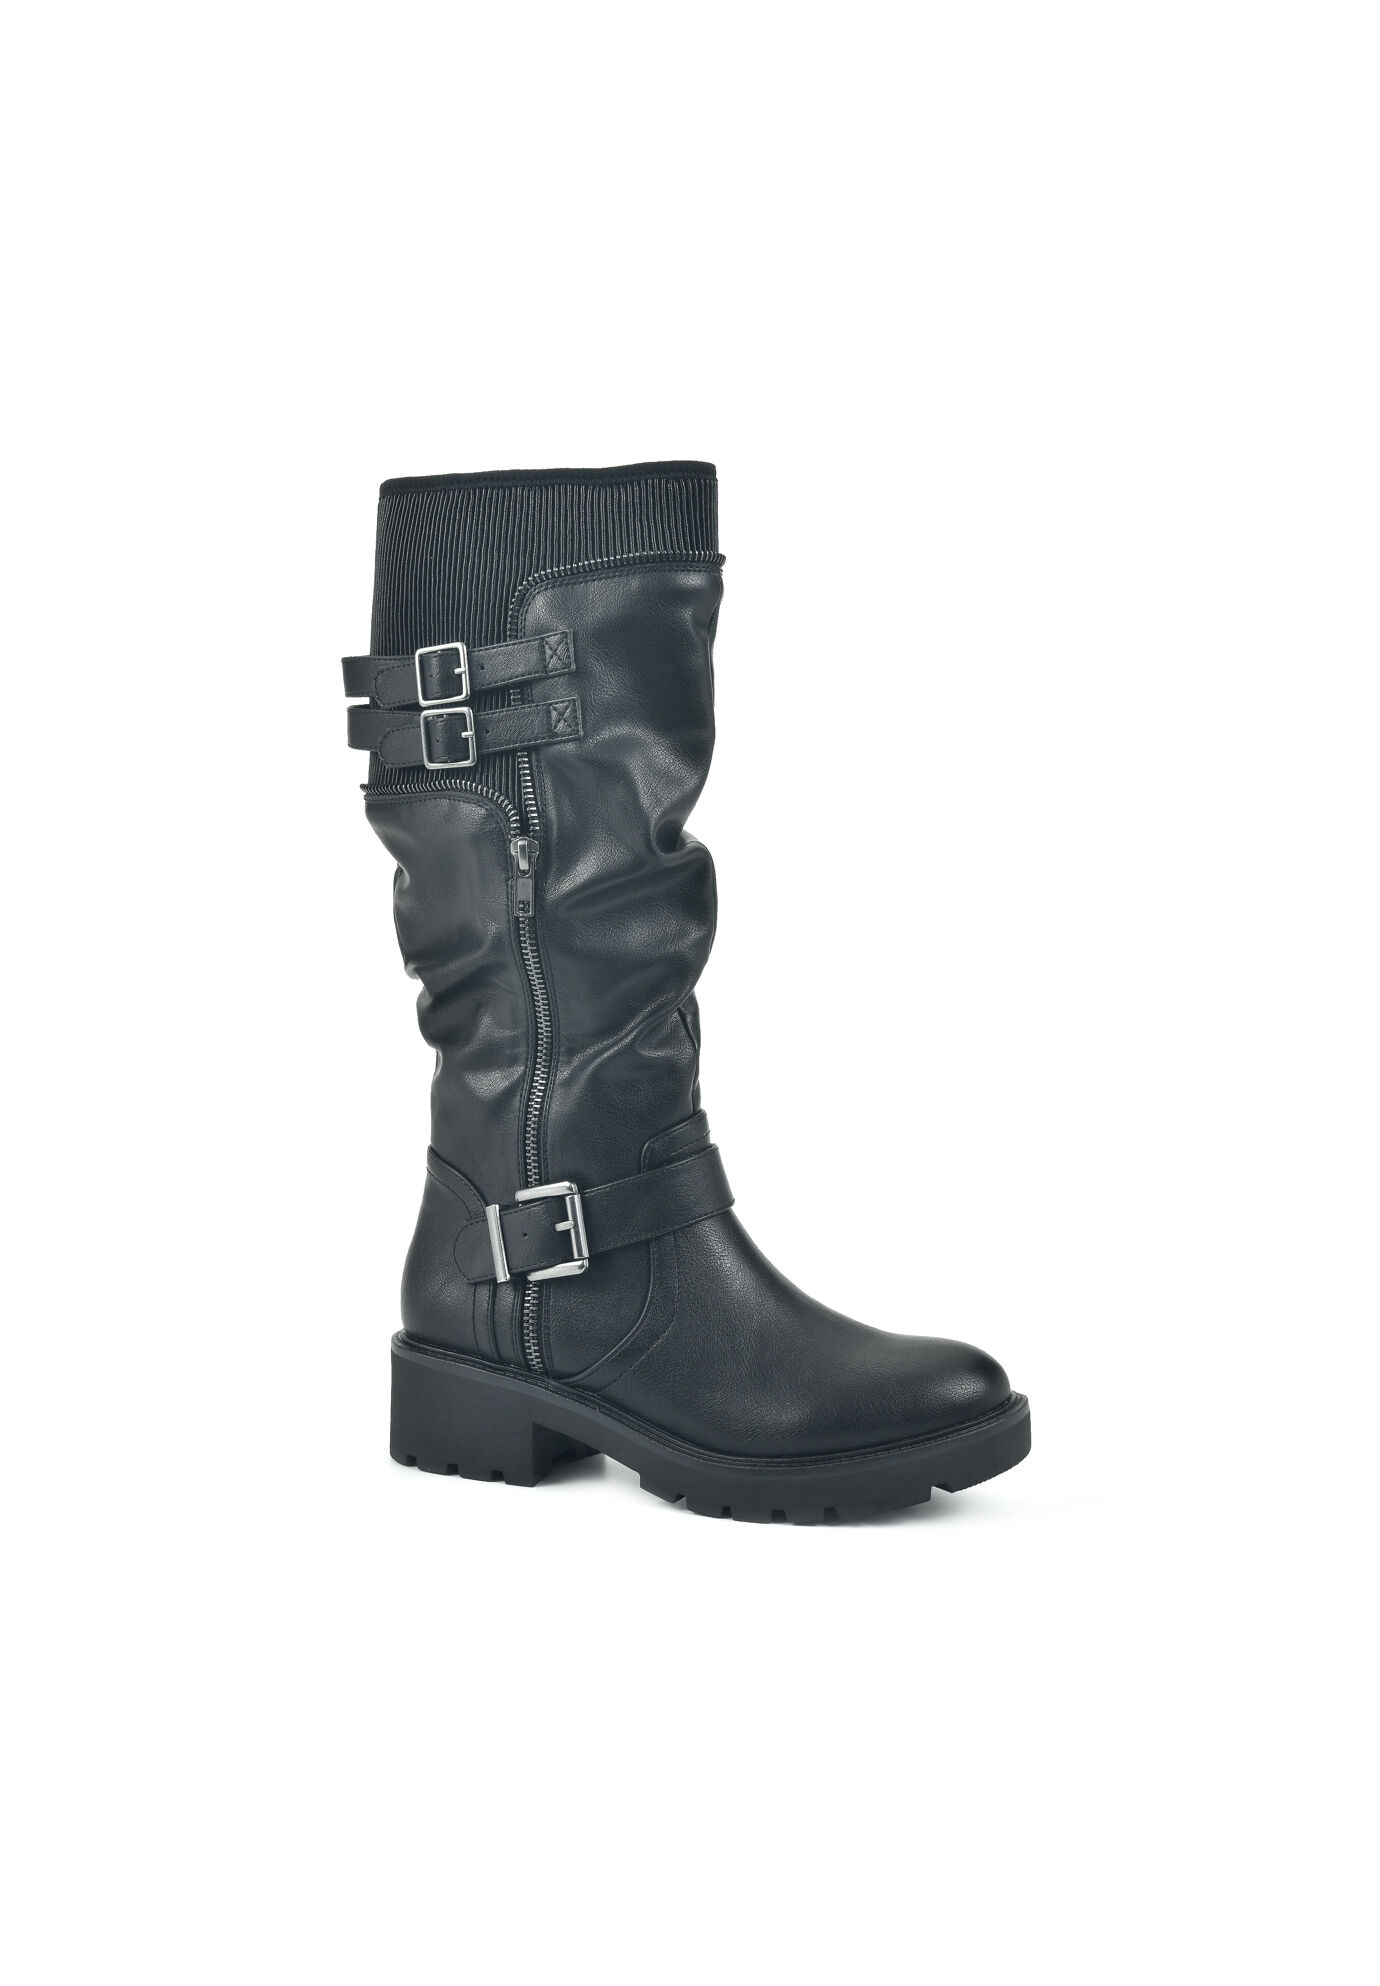 Wide Width Women's Deepest Tall Calf Boot by White Mountain in Black Smooth (Size 6 W)